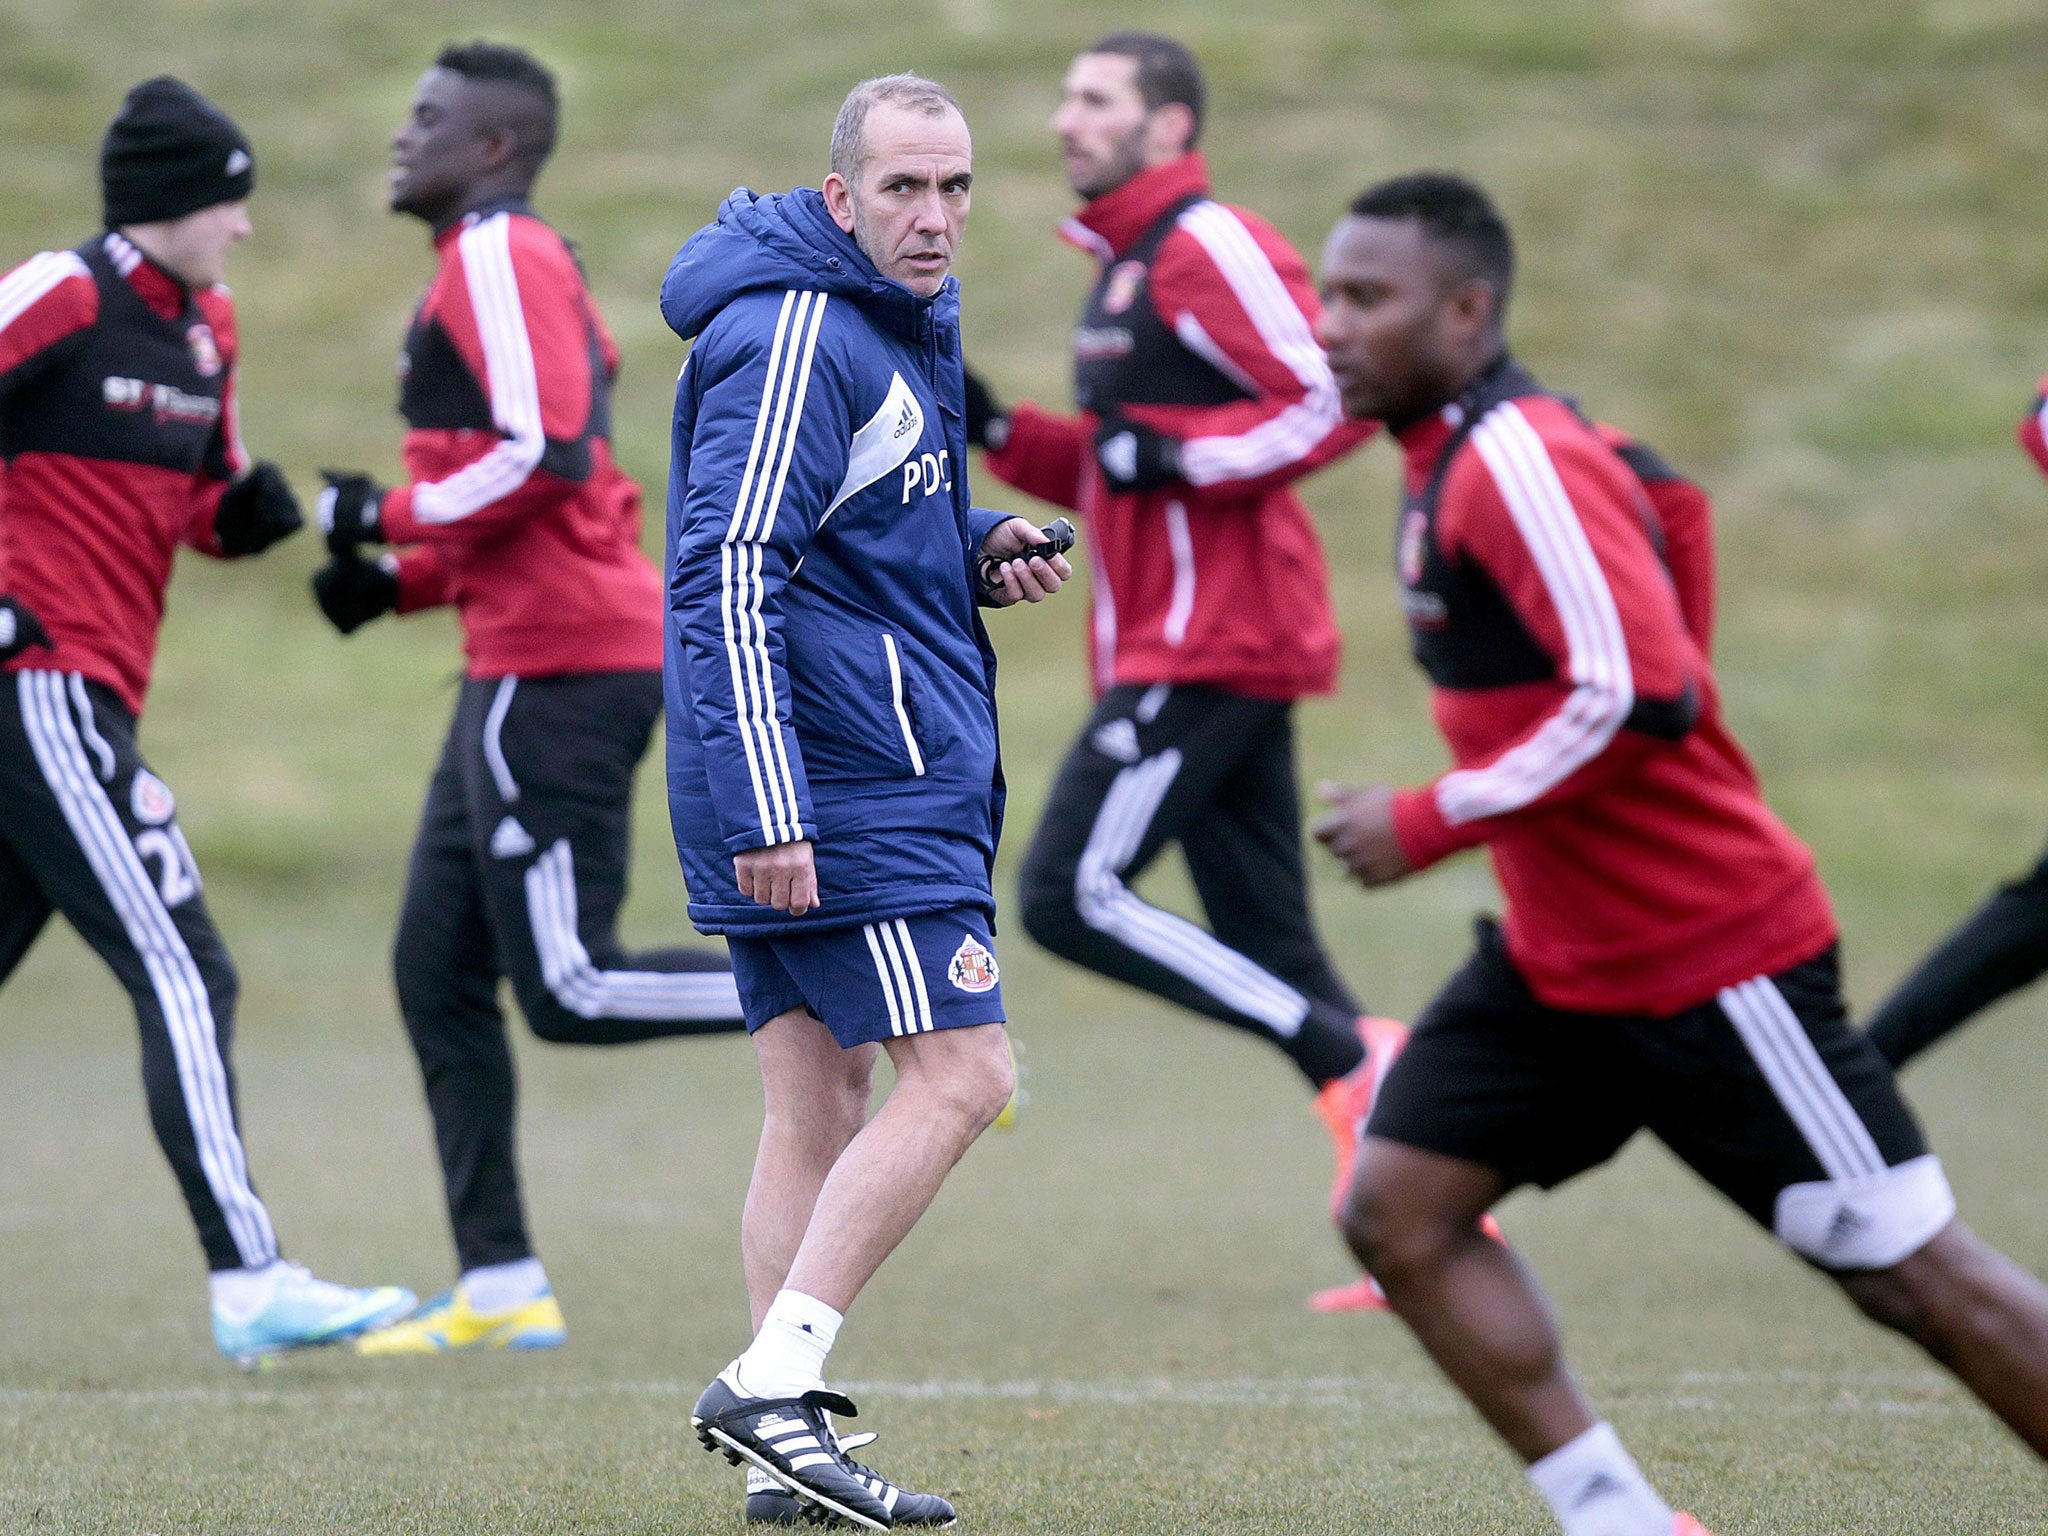 Tyne trials: Sunderland’s manager Paolo Di Canio tests his players against the clock ahead of today’s derby